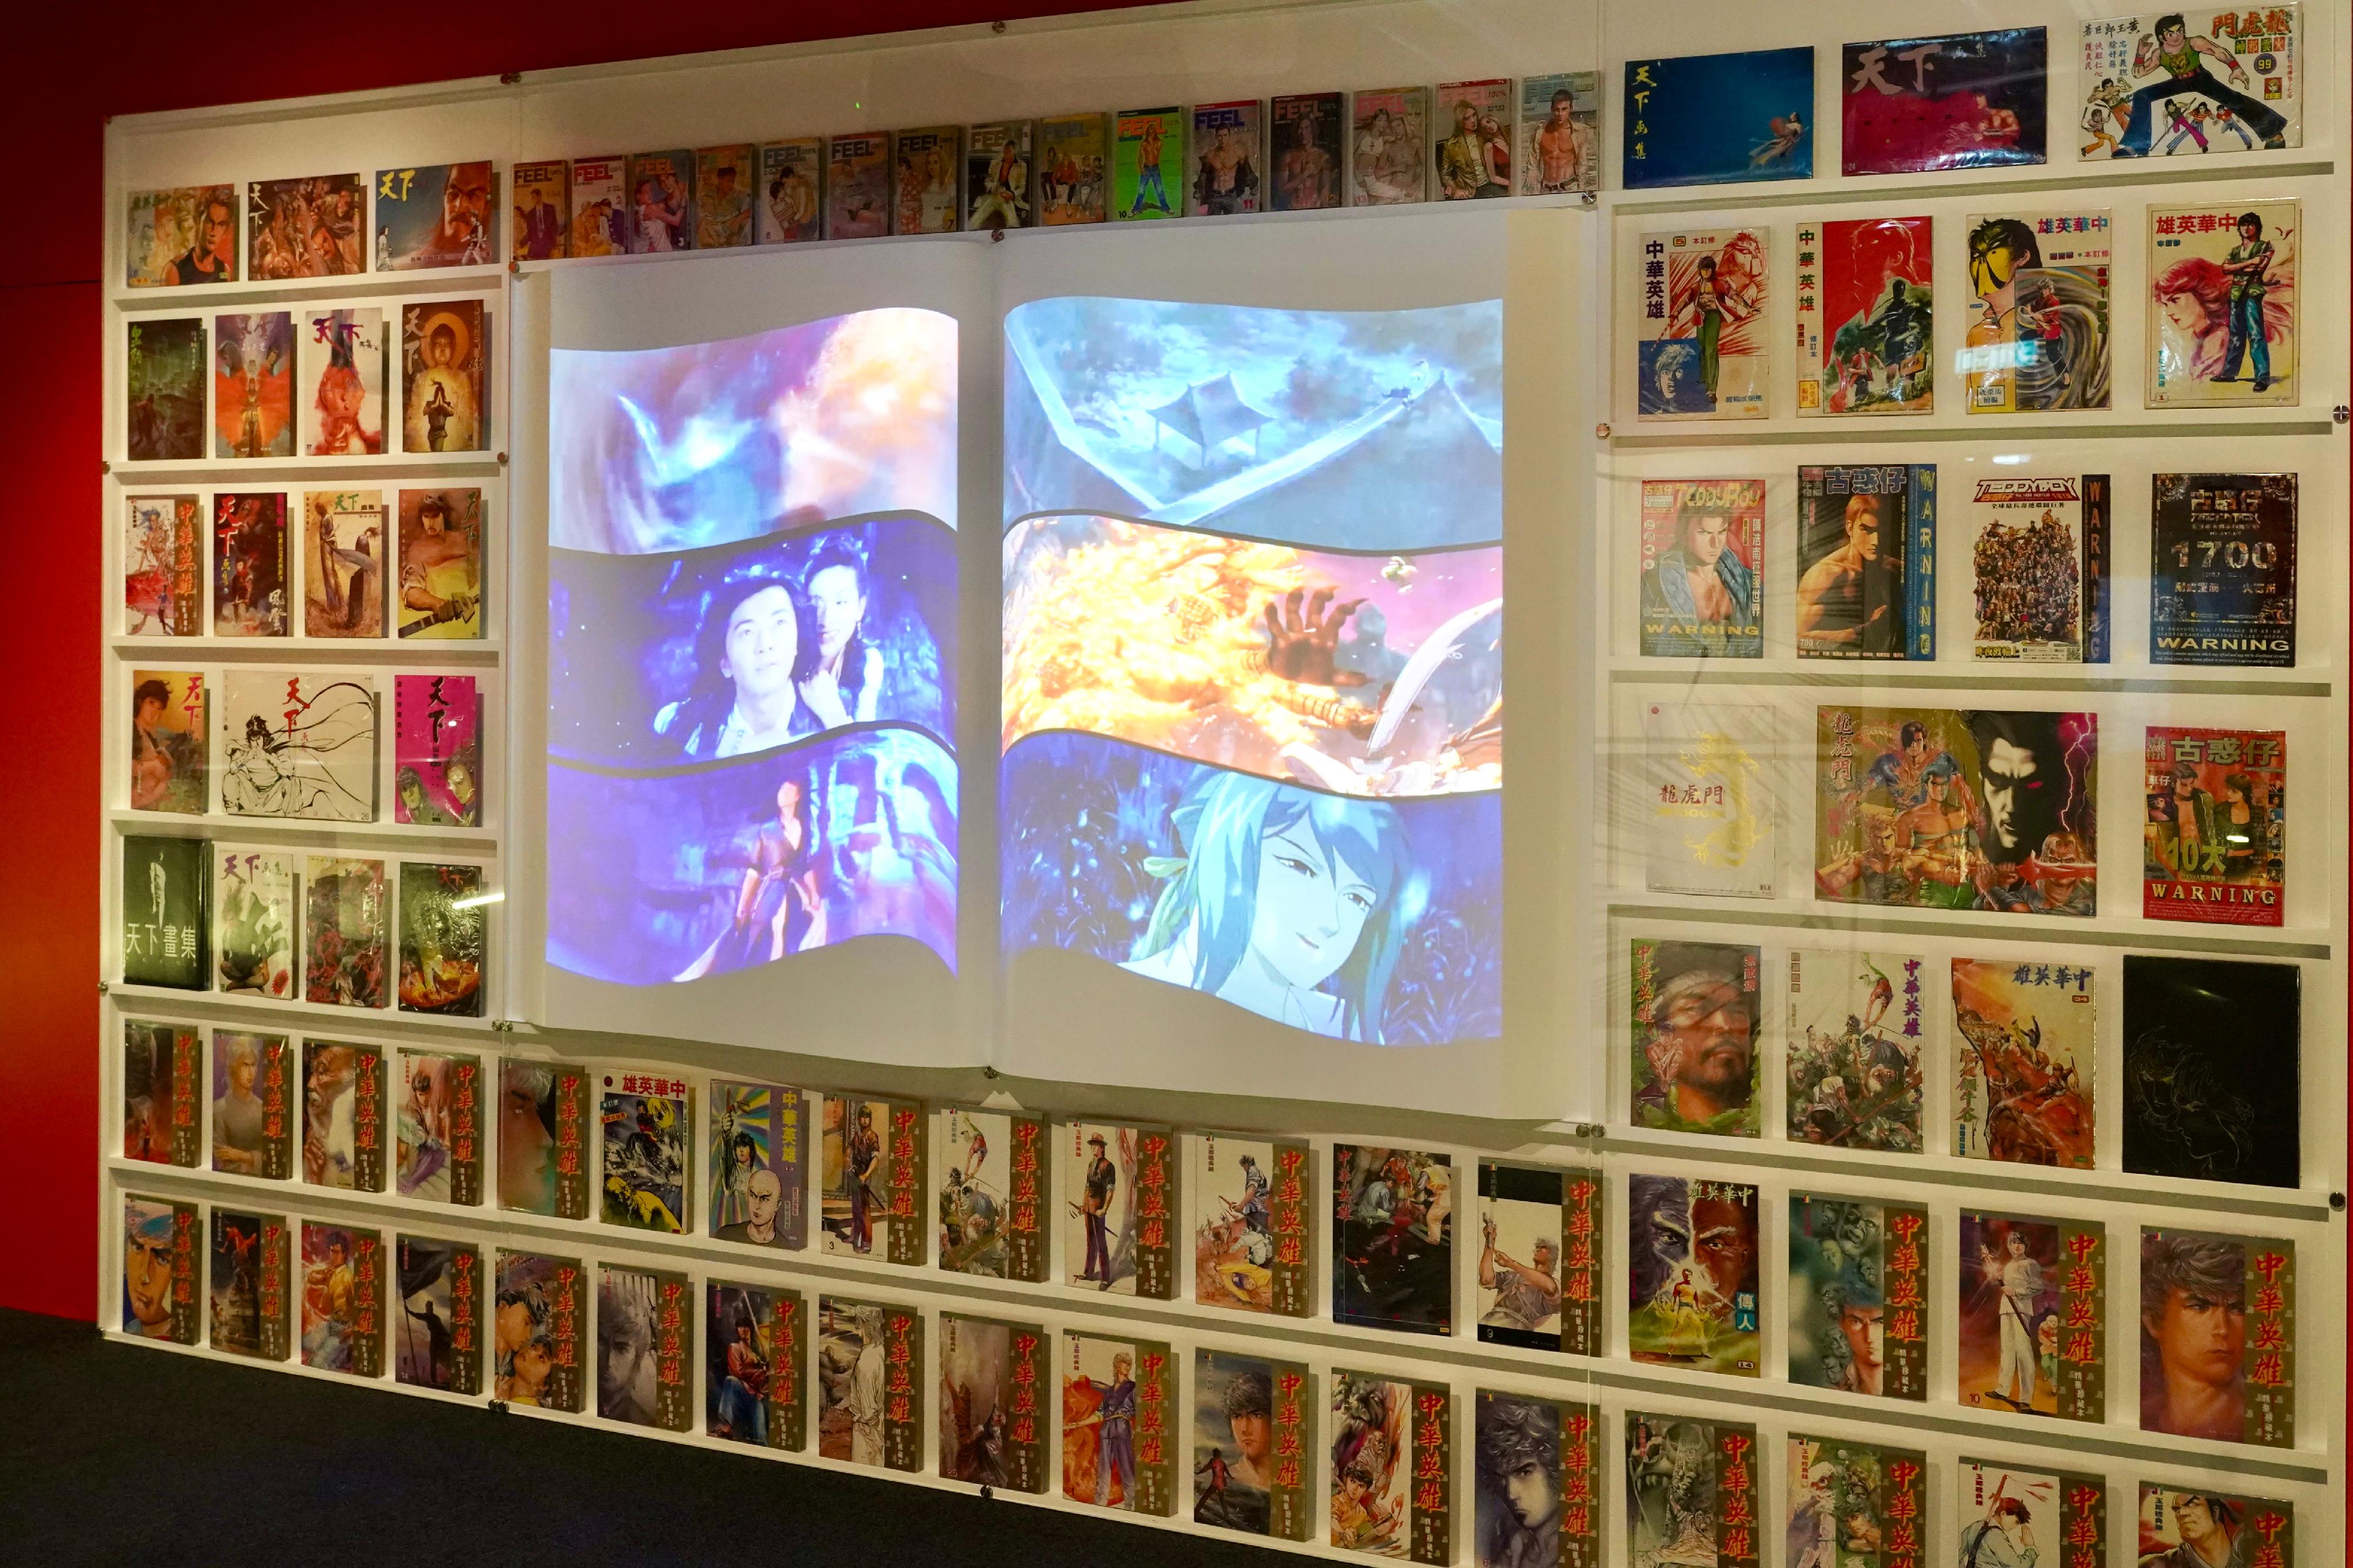 The exhibition "Tango Between Images - Hong Kong Films & Comics", organised by the Hong Kong Film Archive (HKFA) of the Leisure and Cultural Services Department, is being held from today (February 24) to October 8 at the Exhibition Hall of the HKFA. Photo shows a large-scale comic wall made up of comic books of several classic Hong Kong comic series.